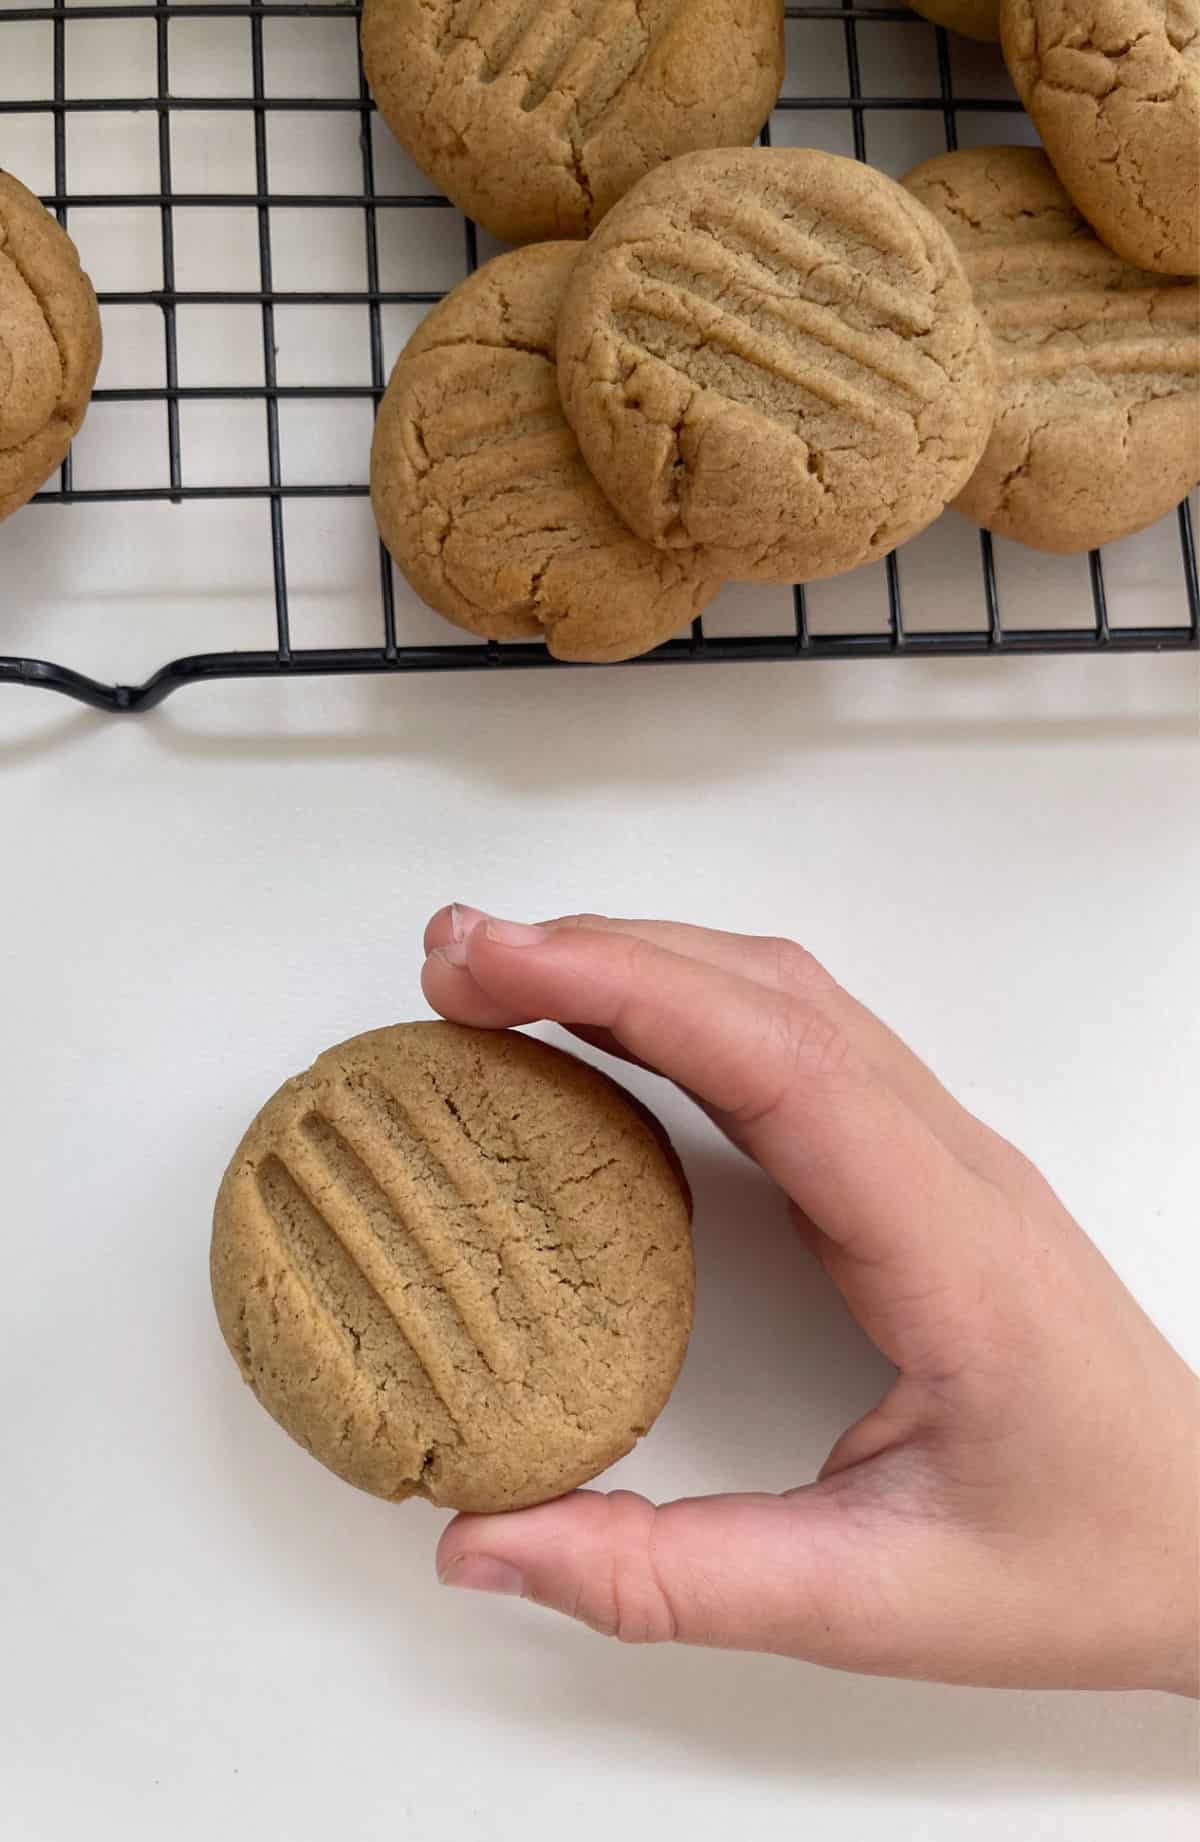 Child's hand reaching for a ginger biscuit.